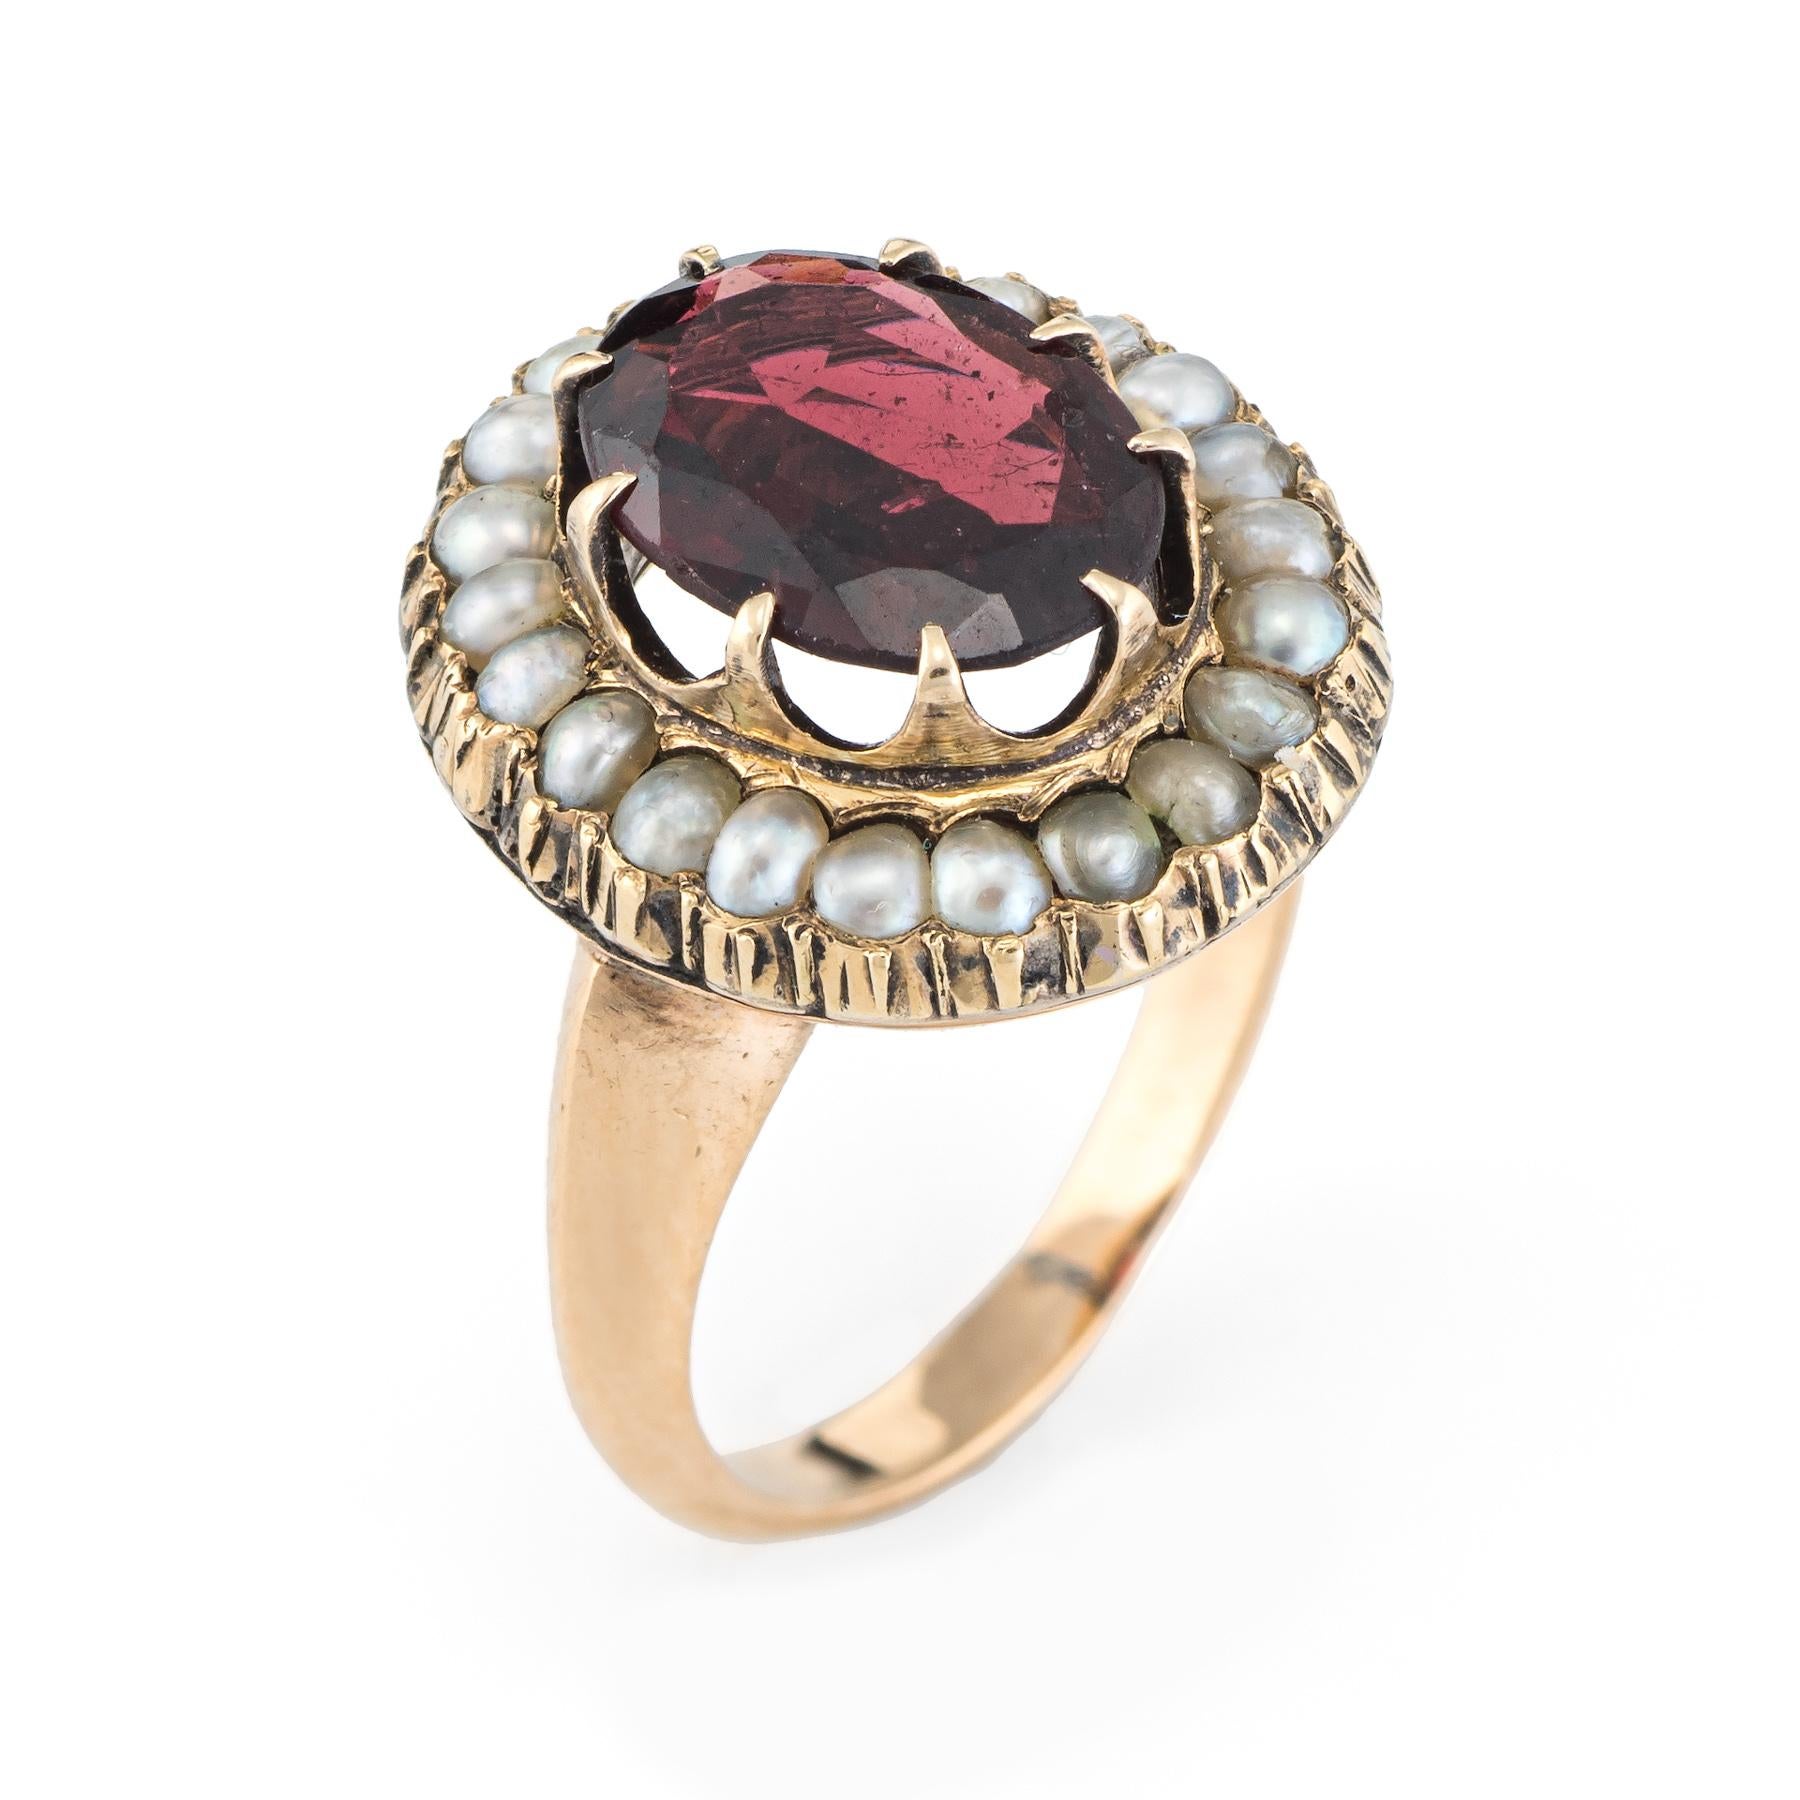 Elegant & finely detailed Art Deco era ring (circa 1920s to 1930s), crafted in 14 karat yellow gold. 

Faceted oval shaped garnet measures 10mm x 6.5mm (estimated at 2 carats). 22 natural seed pearls surround the garnet and measure (average) 2mm.